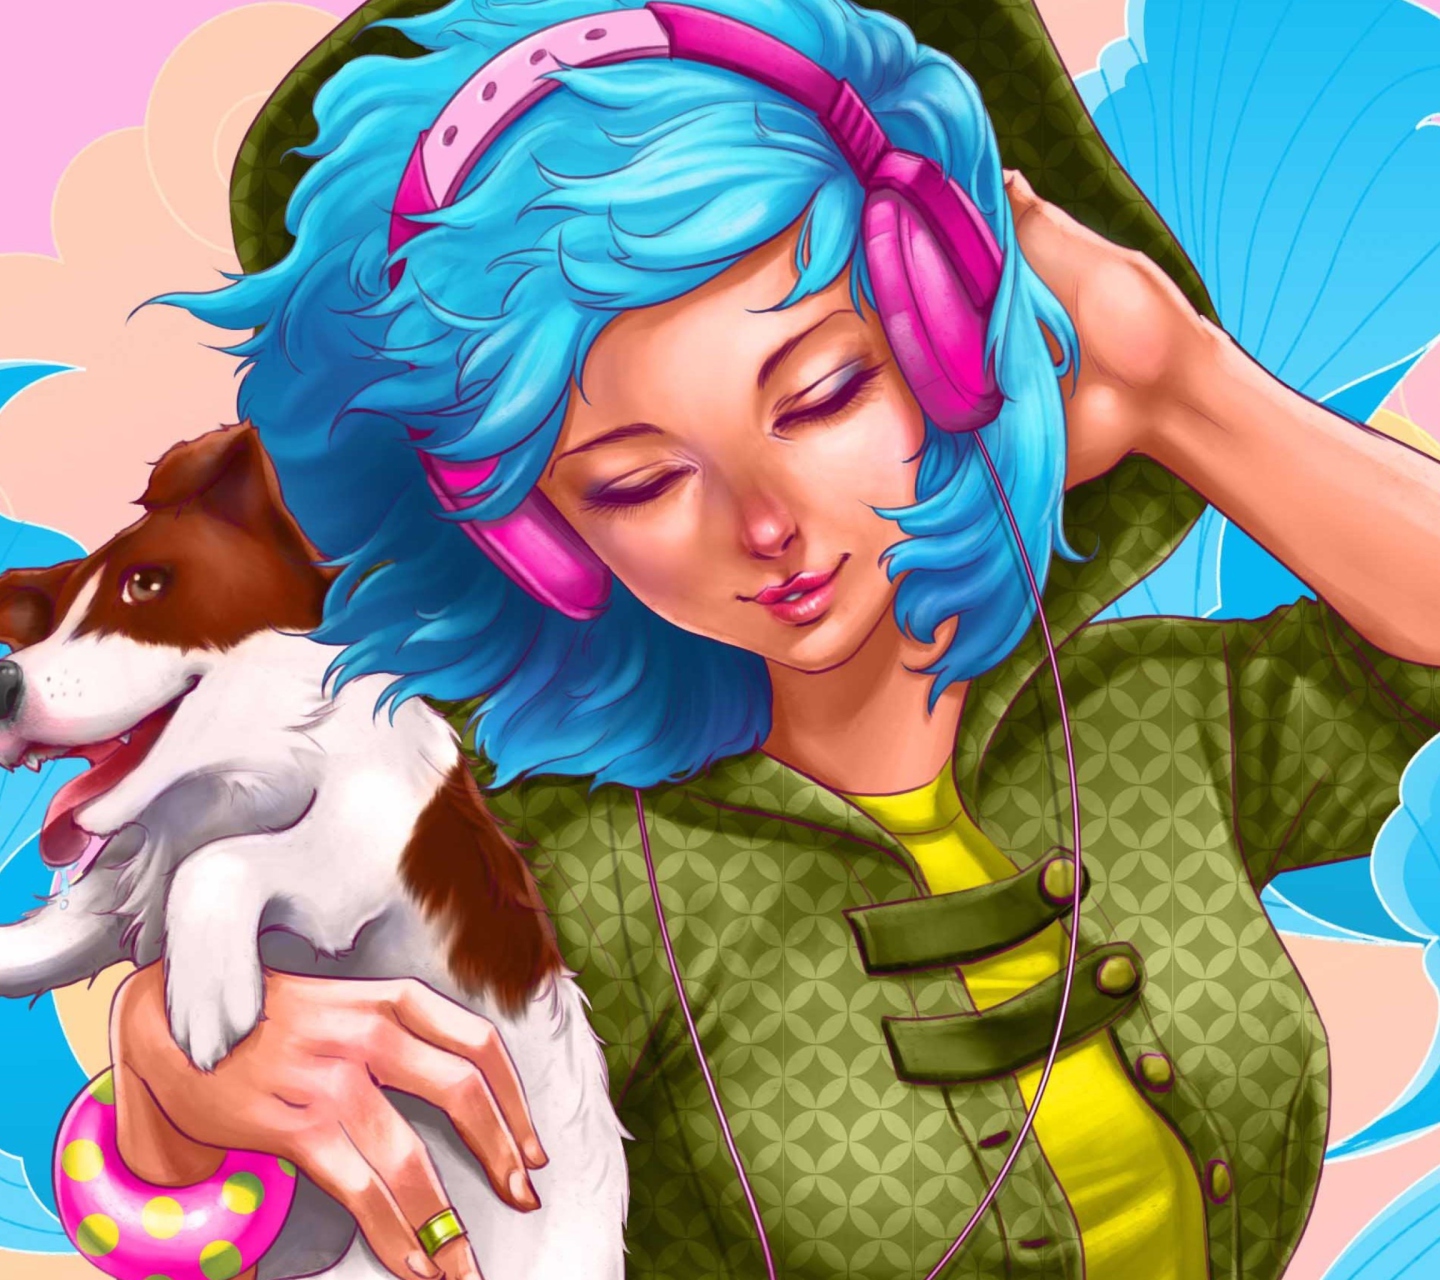 Girl-With-Blue-Hair-And-Pink-Headphones-Drawing-1440x1280.jpg